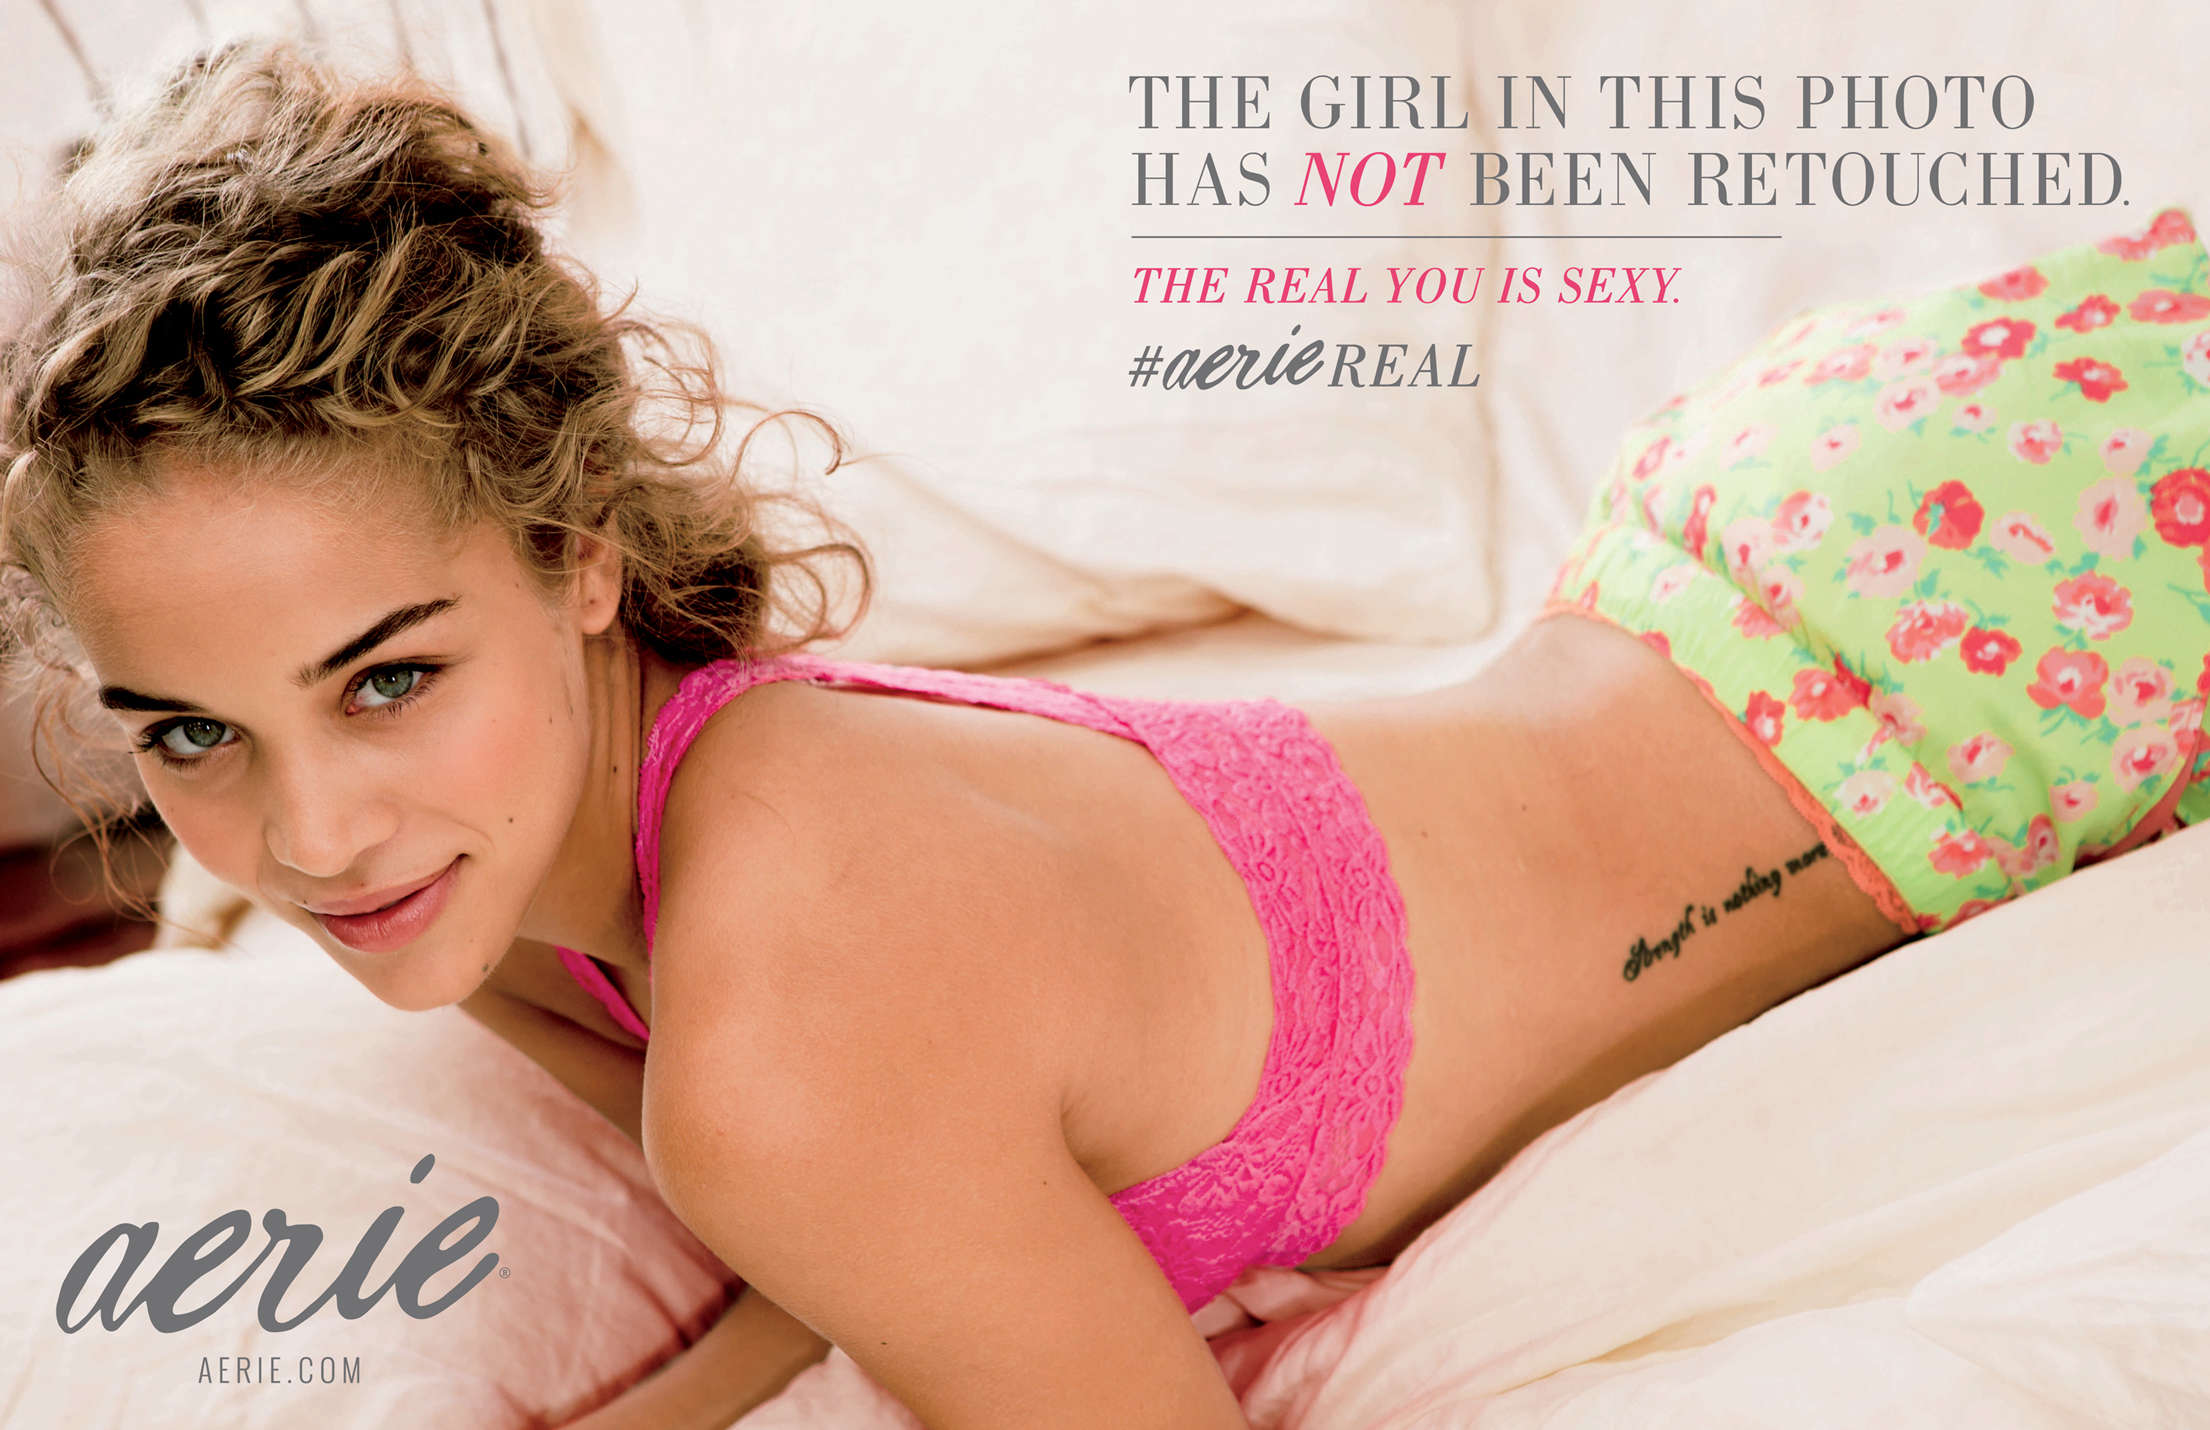 READ MORE: American Eagle Stopped Airbrushing Lingerie Models And Sales Are Soaring » 